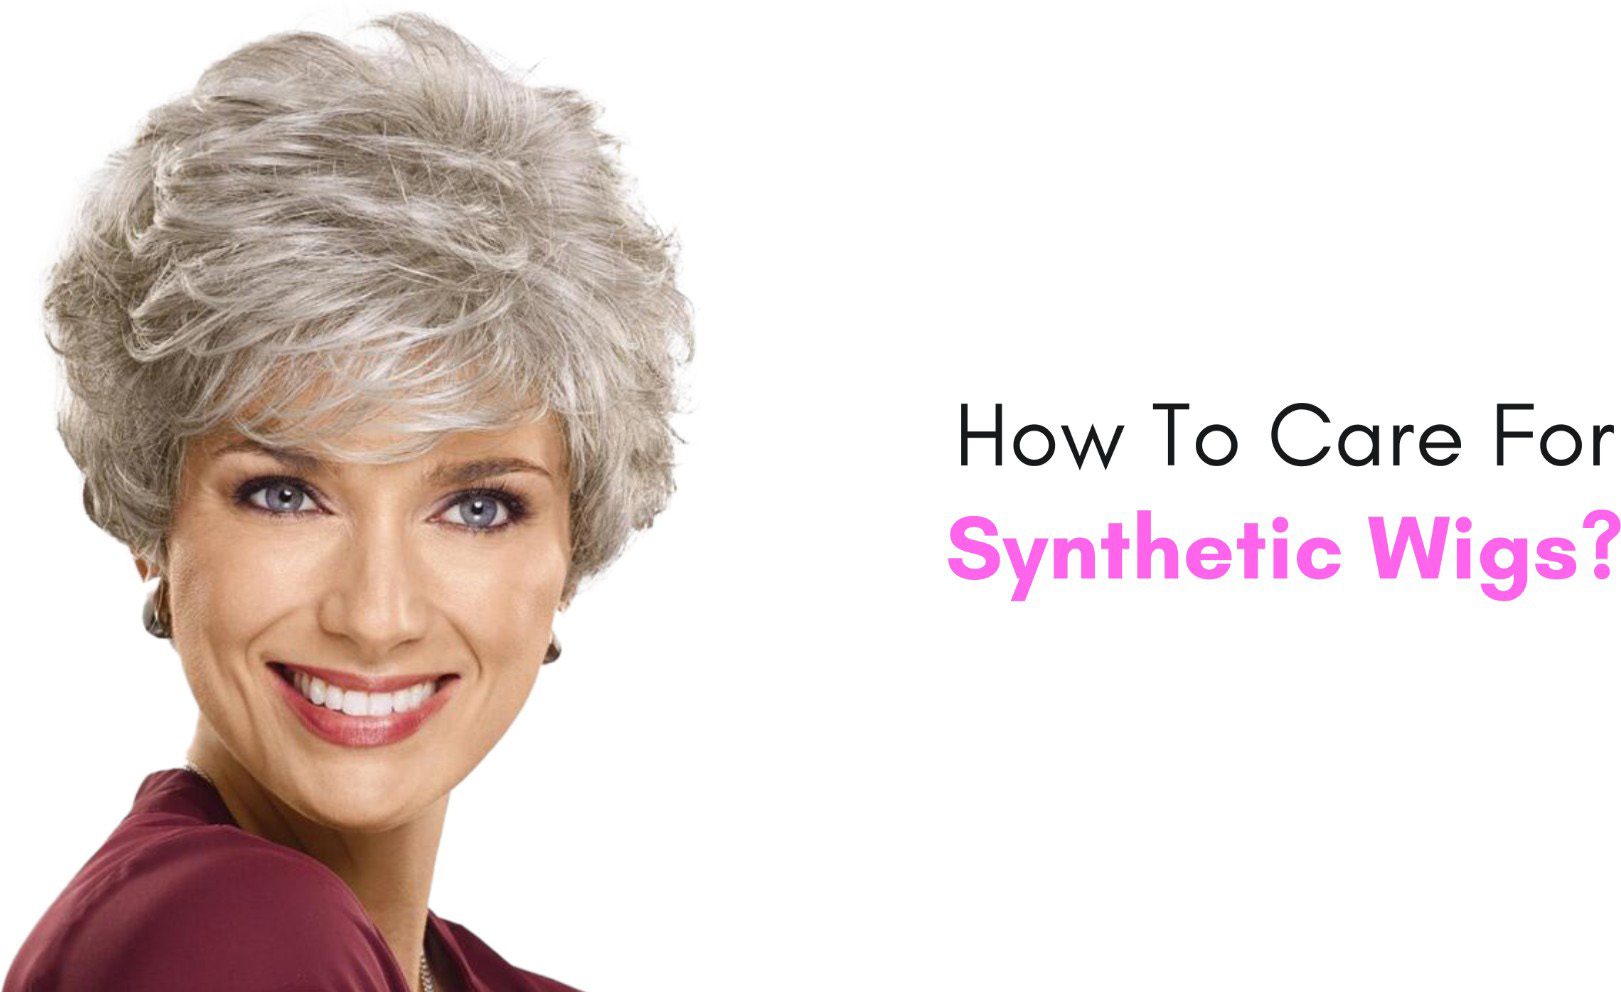 How To Care For Synthetic Wigs?